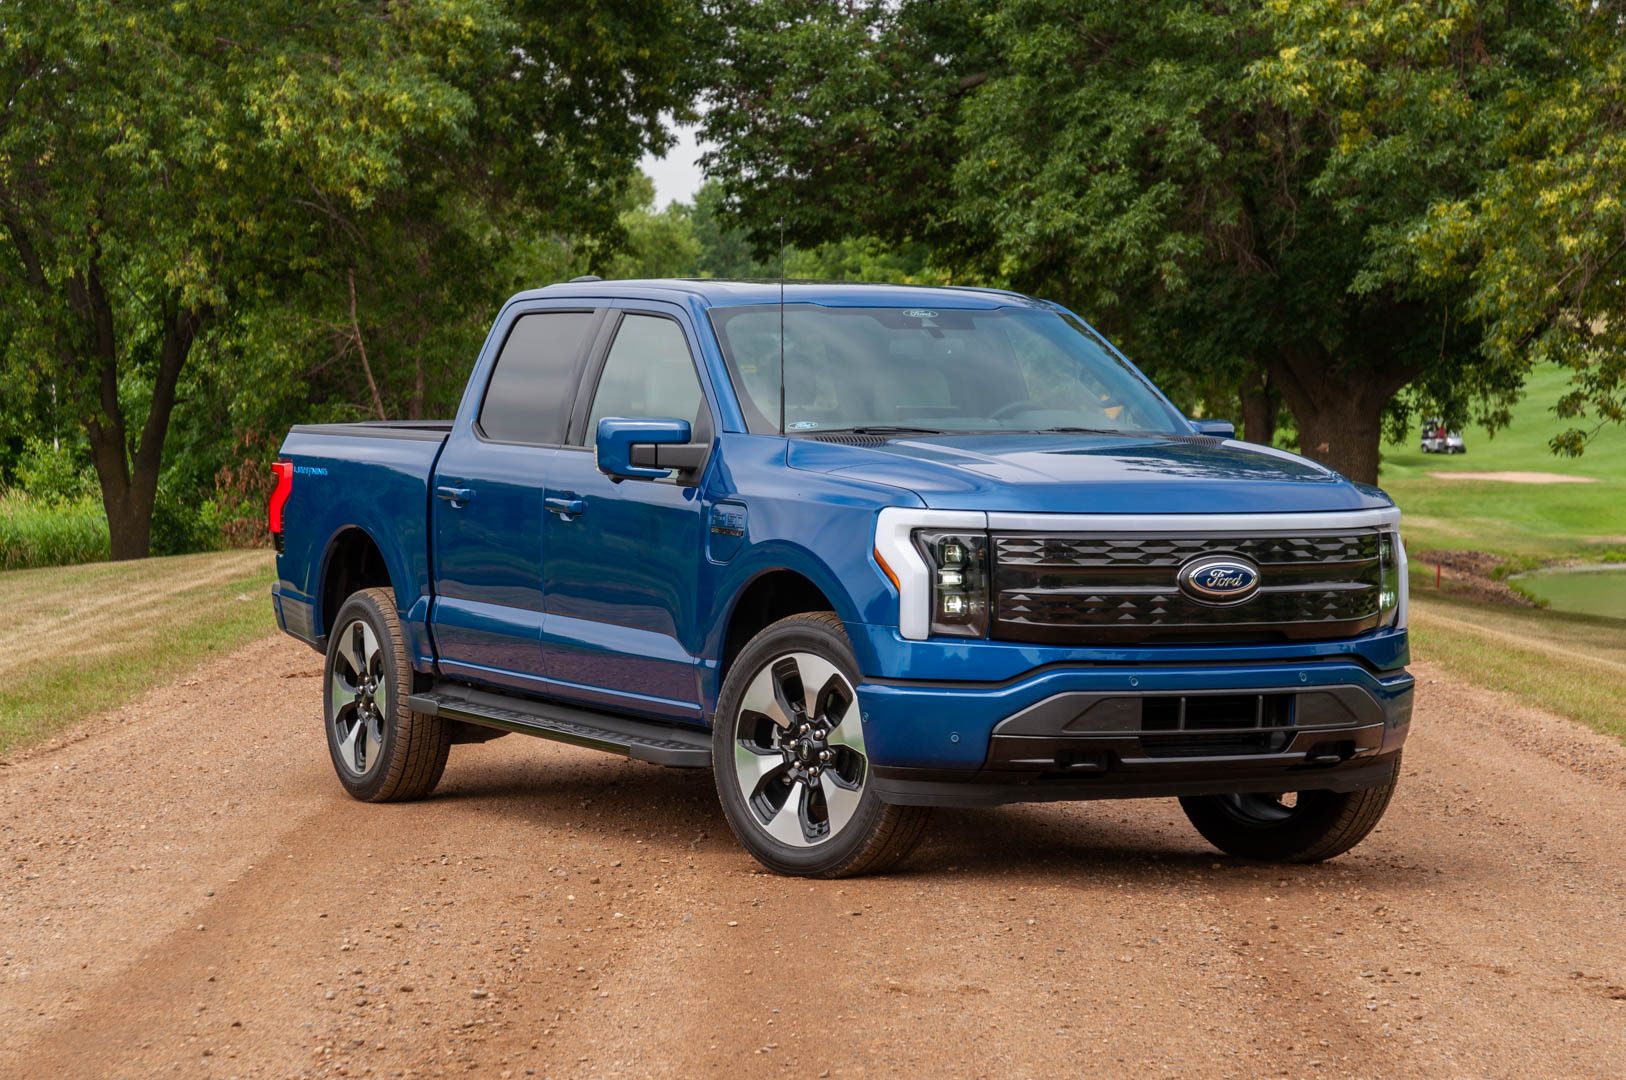 2024 Toyota Grand Highlander, Ford F-150 Lightning, Audi in F1: The Week In Reverse Auto Recent